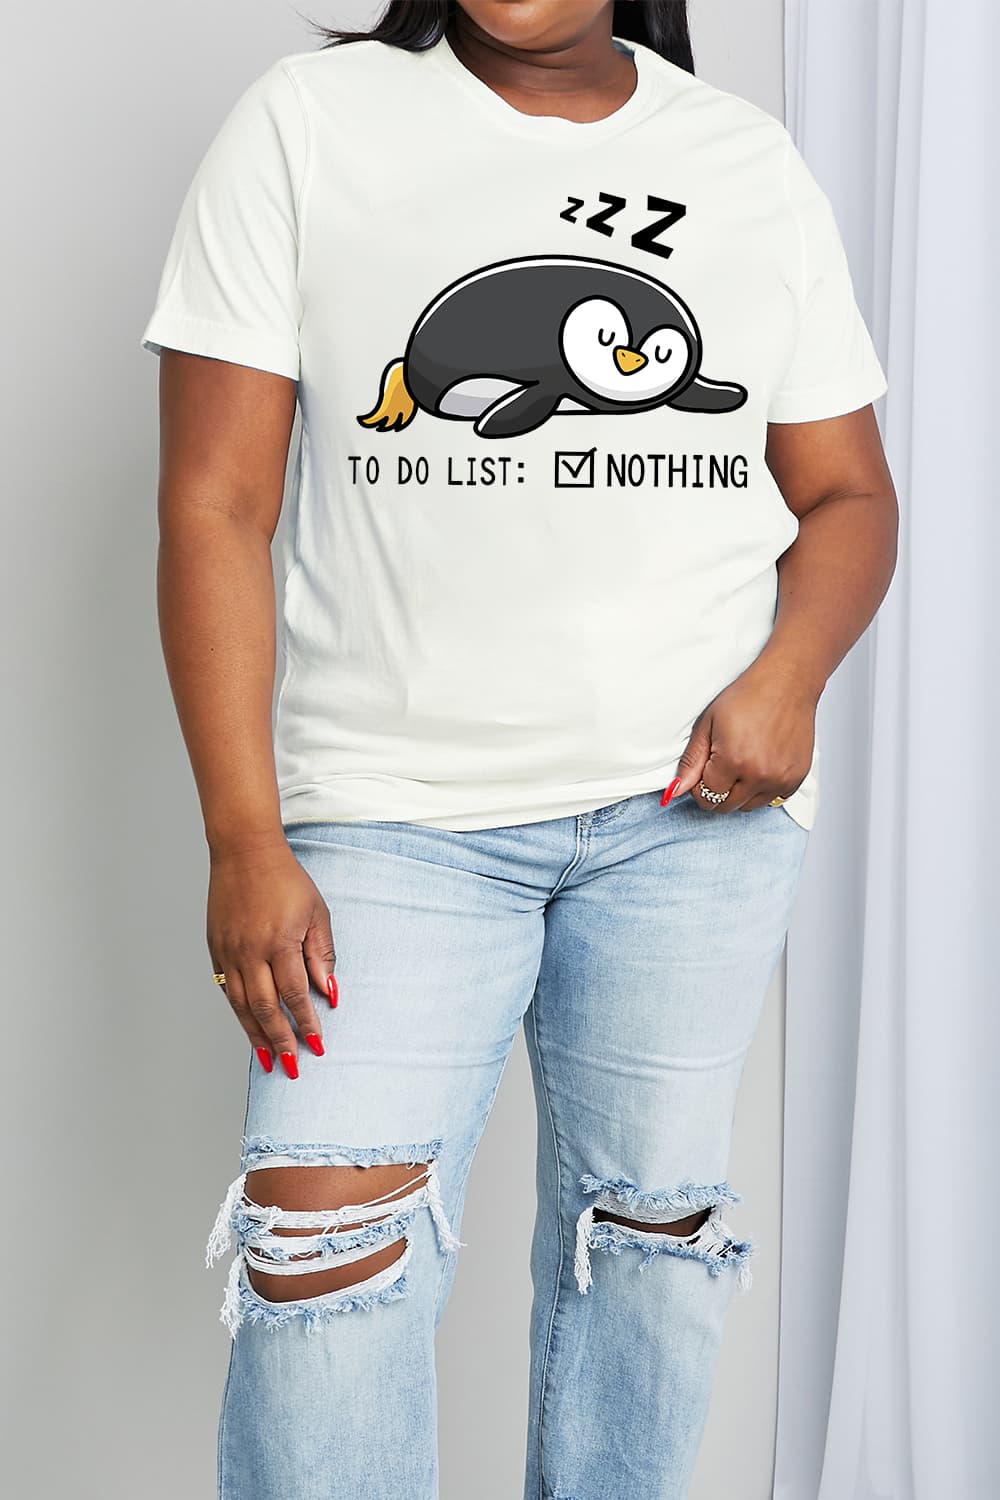 Simply Love Full Size TO DO LIST NOTHING Graphic Cotton Tee